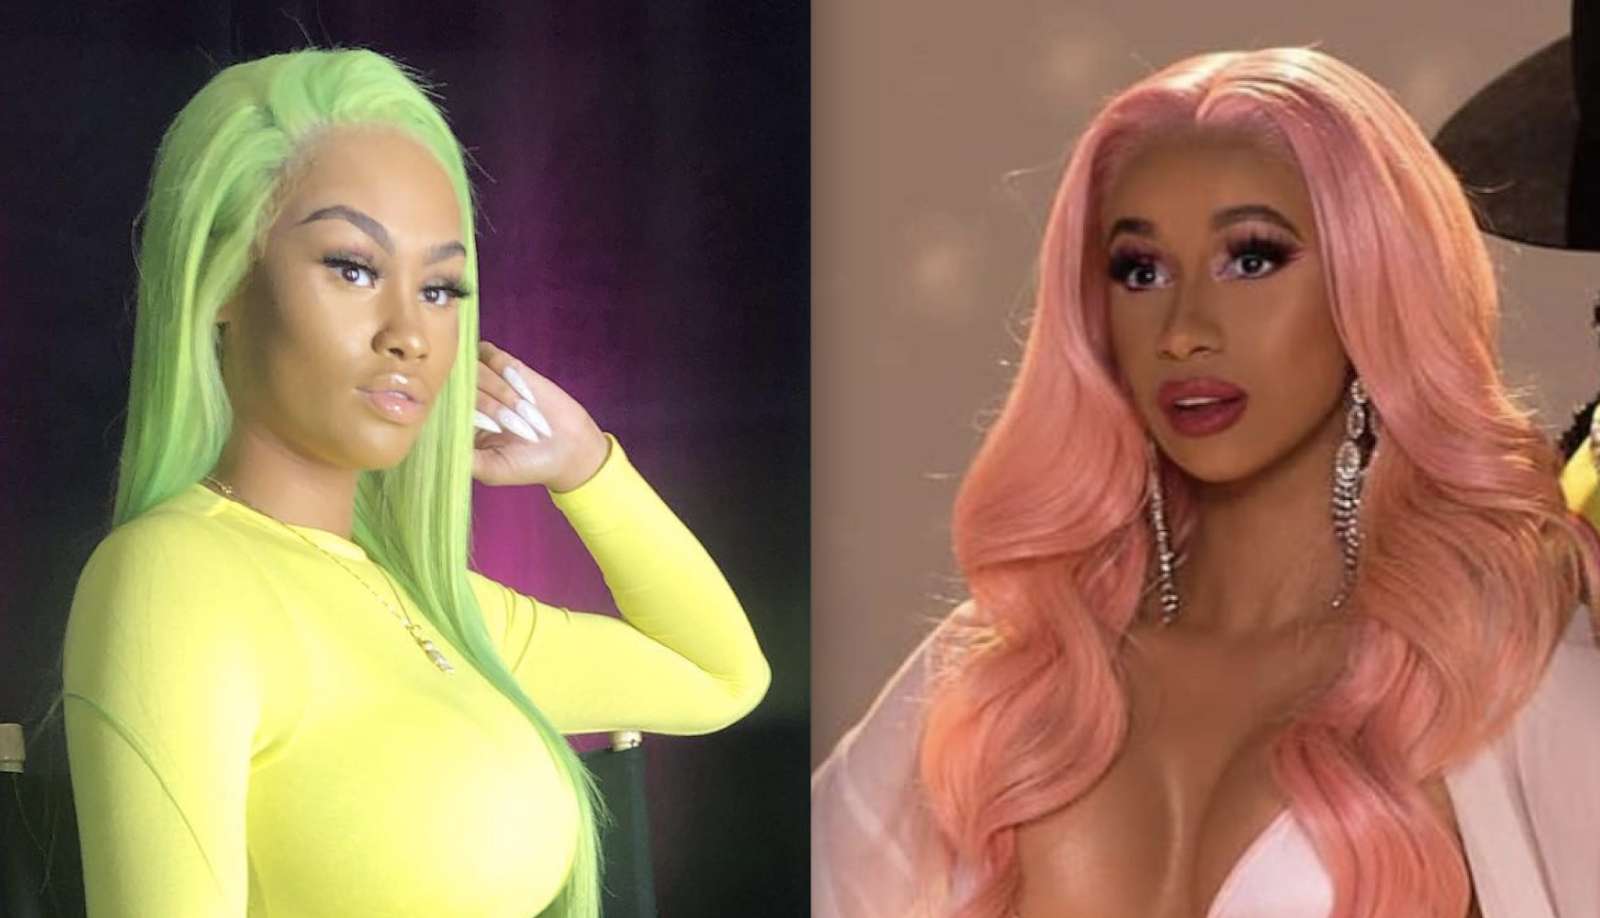 Summer Bunni Drops A Scathing New Diss Track About Cardi B And Offset | Celebrity Insider1600 x 918